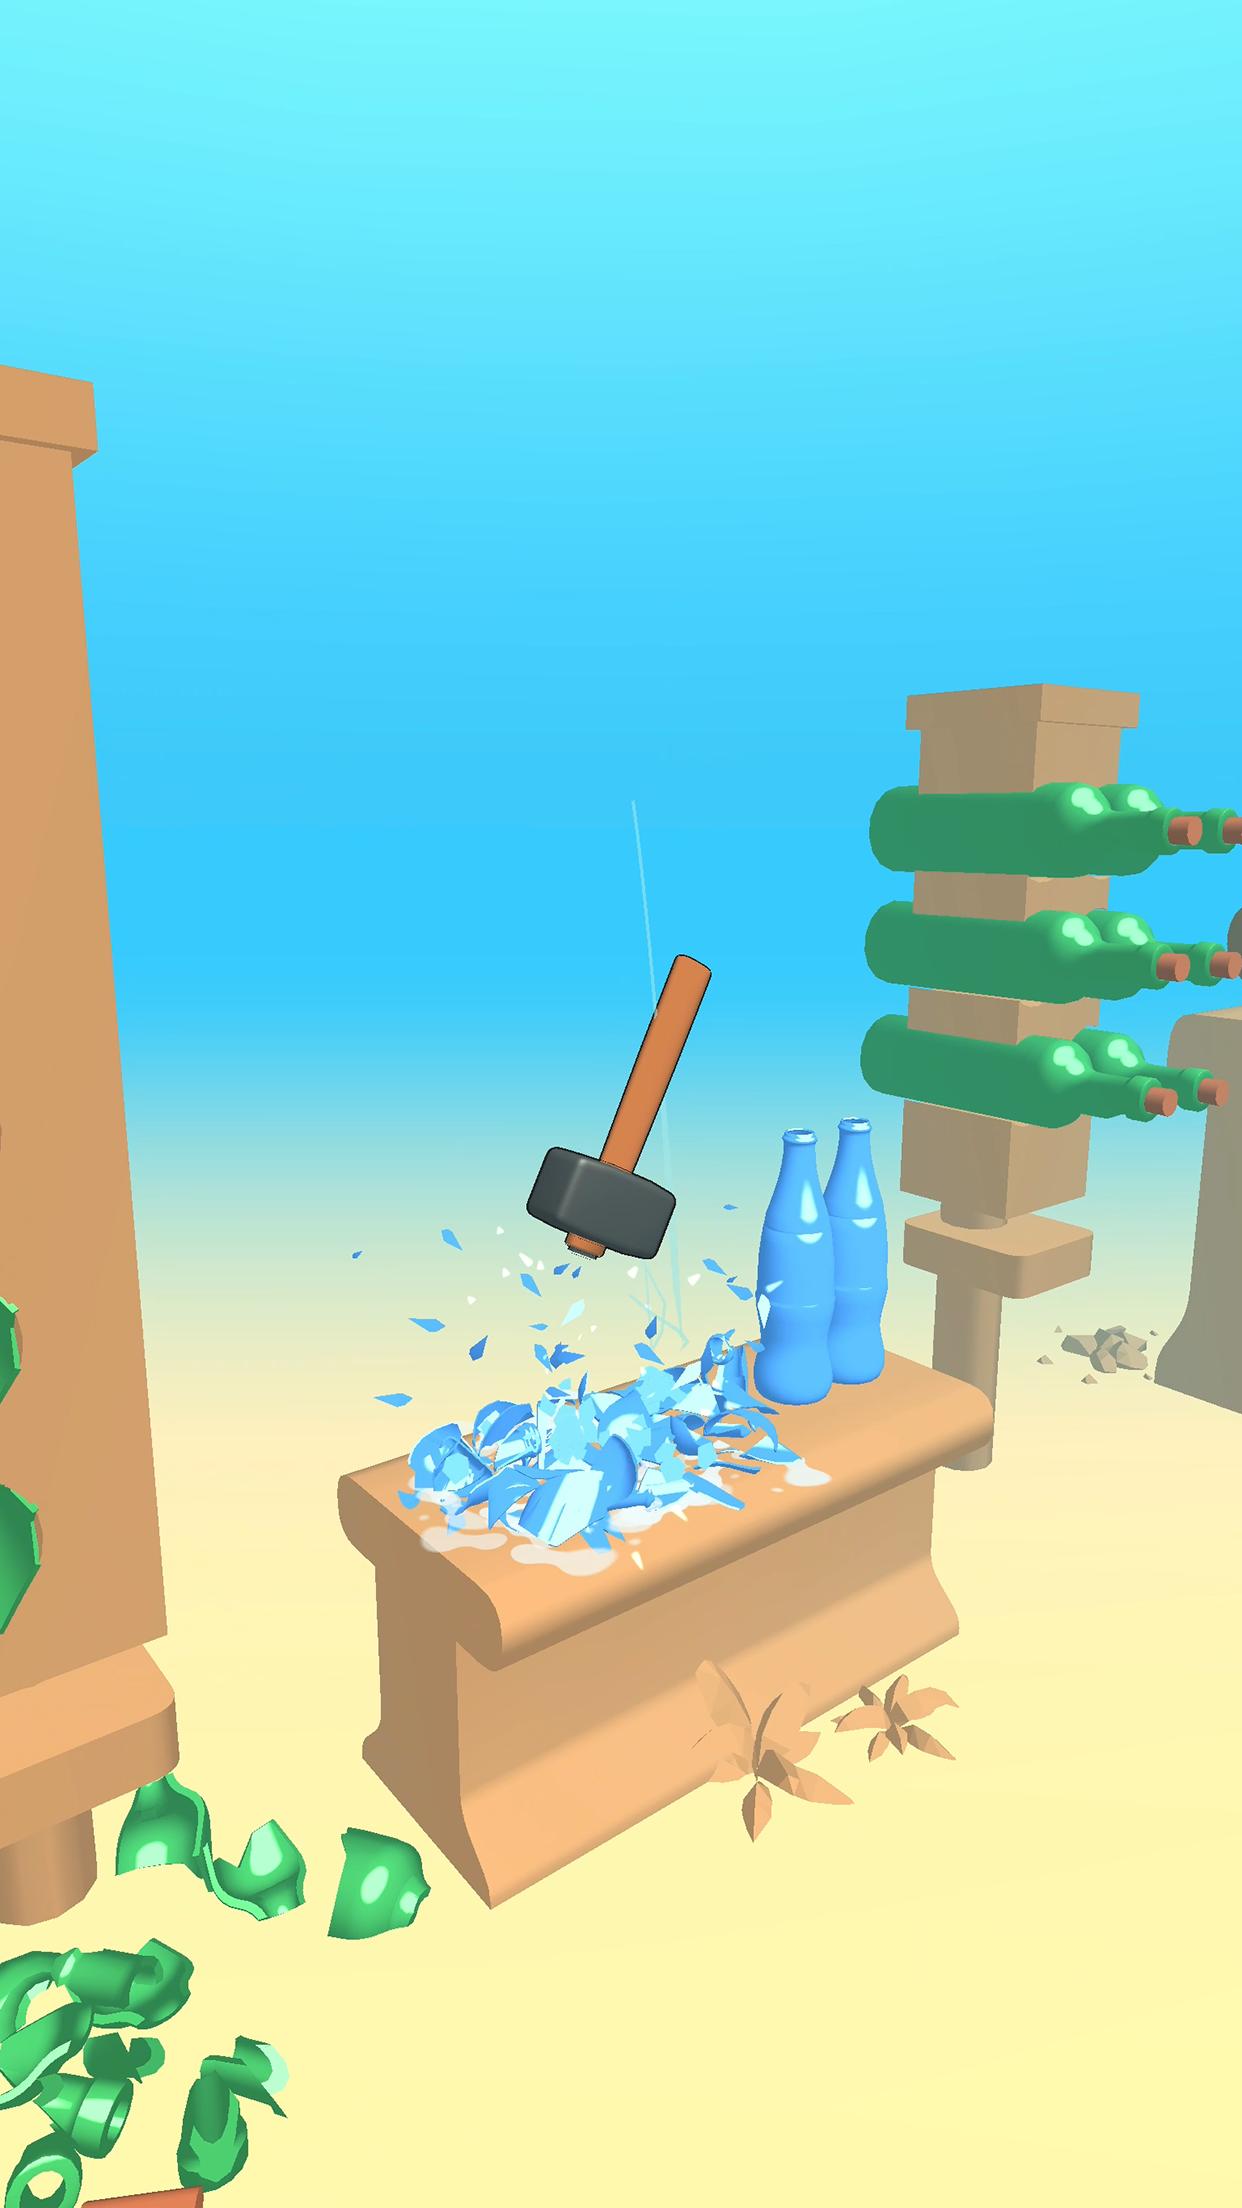 Hammer Flip for Android - APK Download